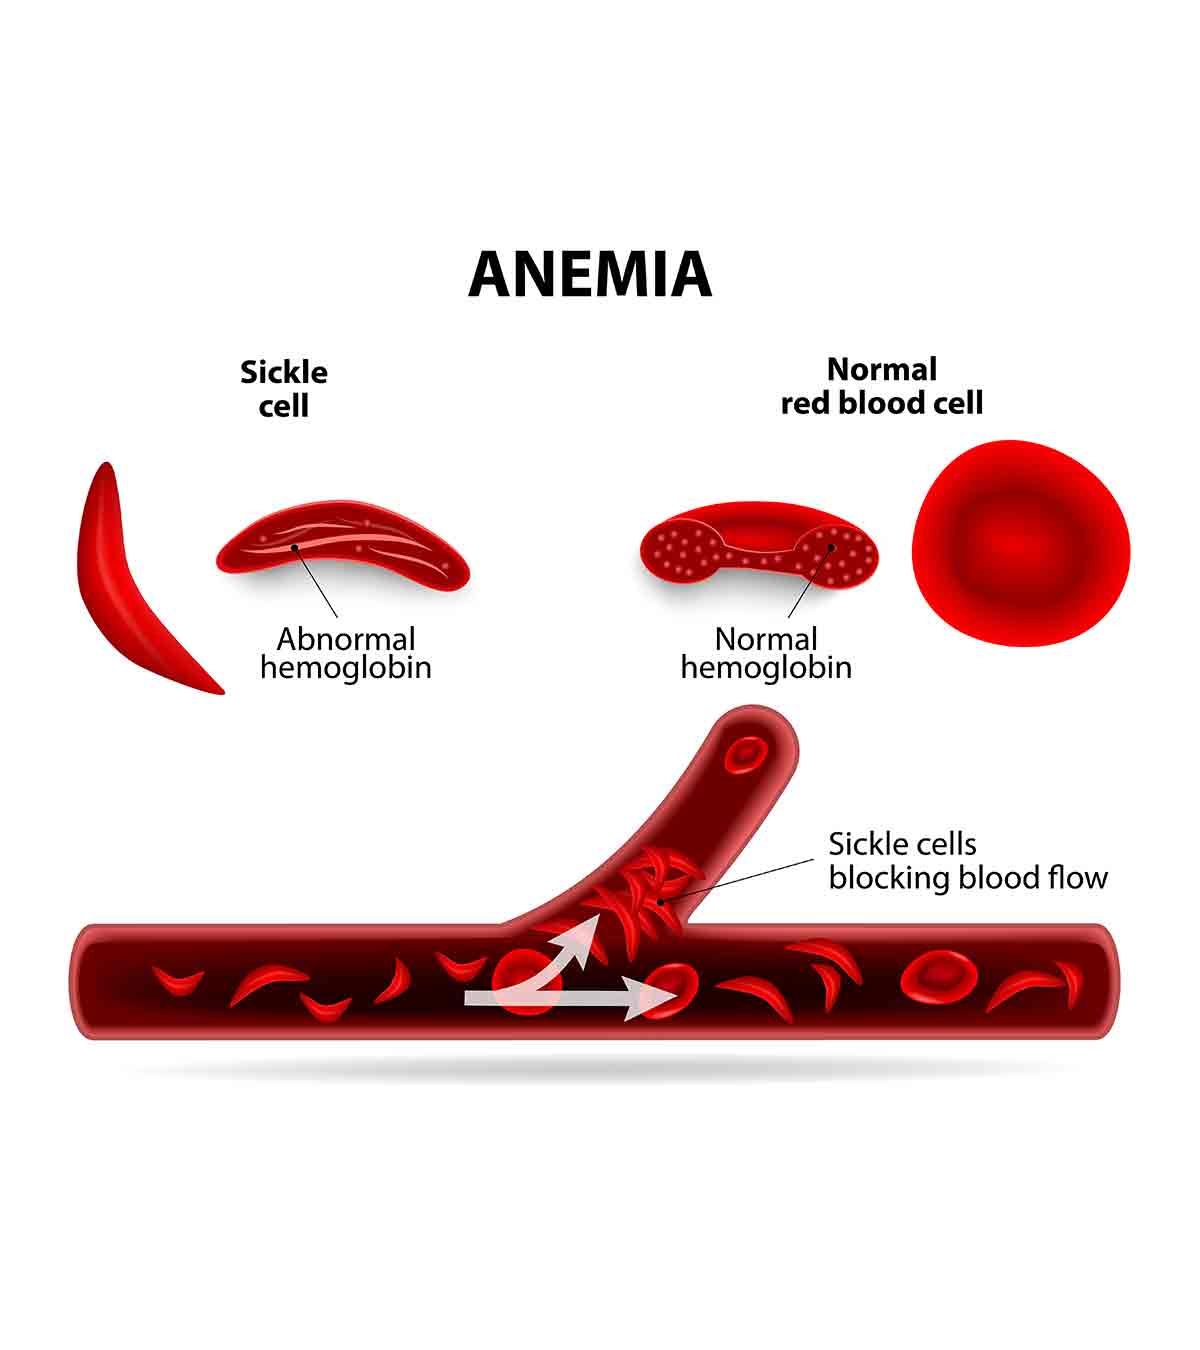 7 Signs Of Sickle Cell Disease In Babies, Types And Treatment